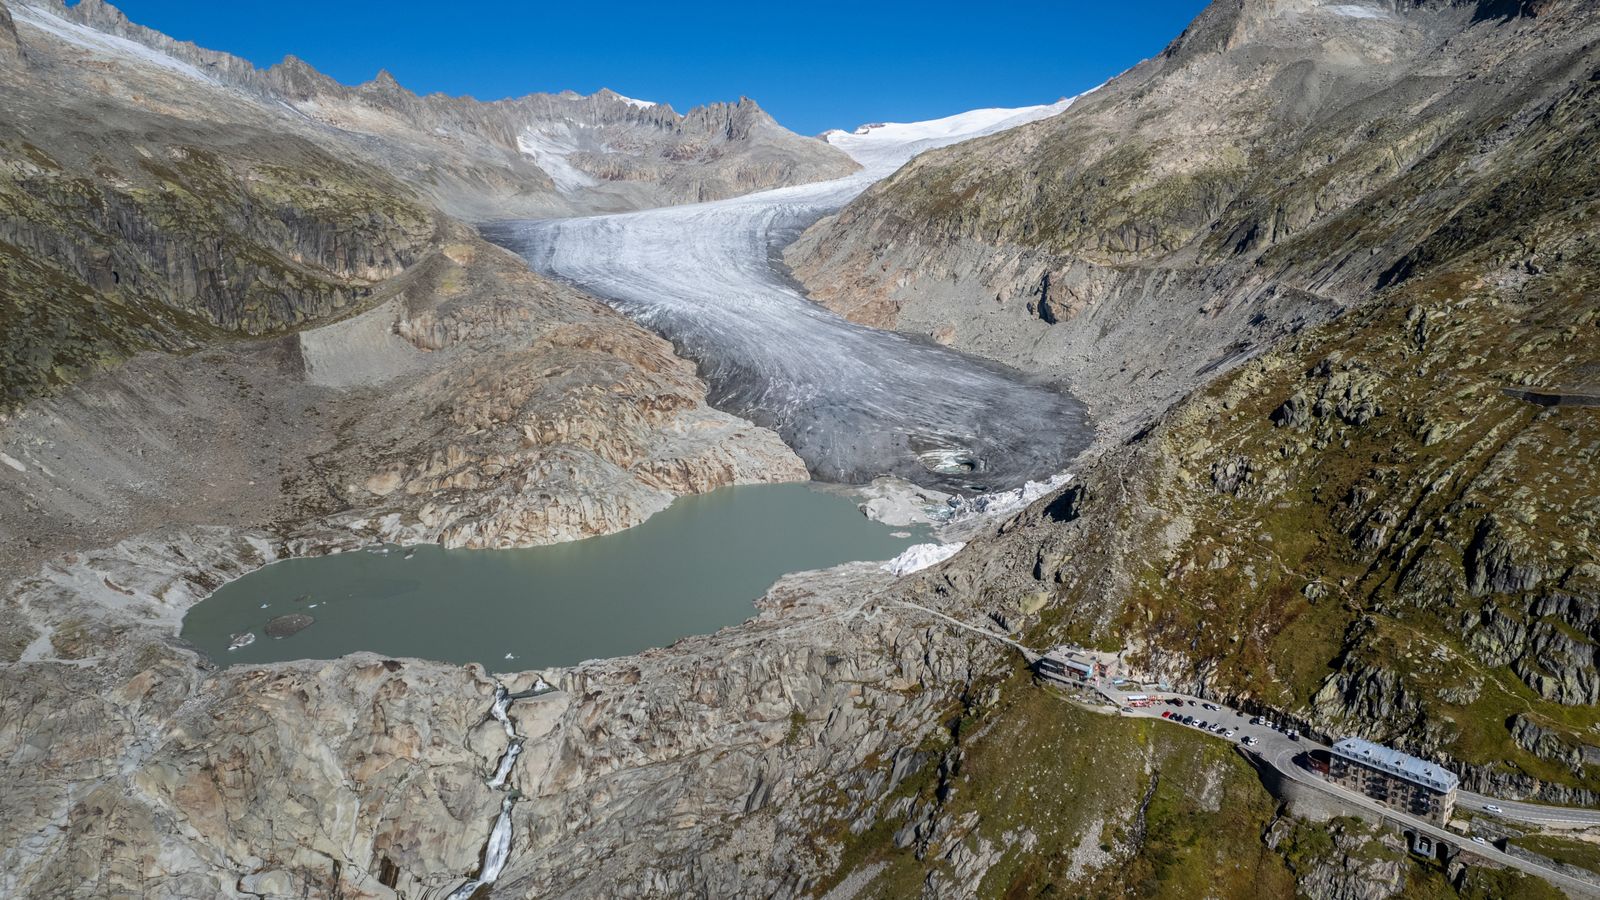 Switzerland has lost 10% of its glaciers in just two years in 'catastrophic' ice melt, study shows